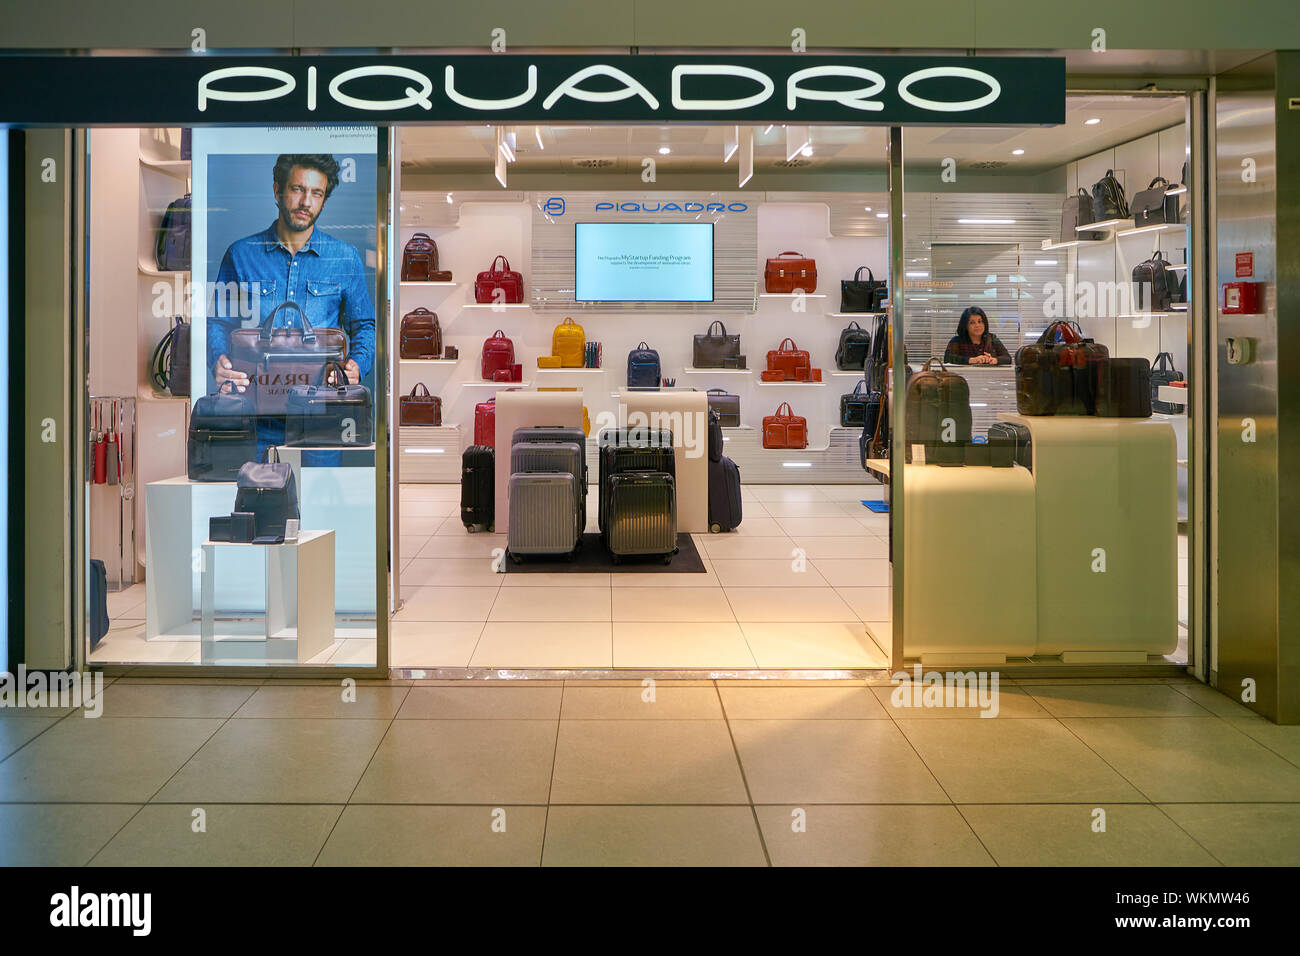 Piquadro High Resolution Stock Photography and Images - Alamy